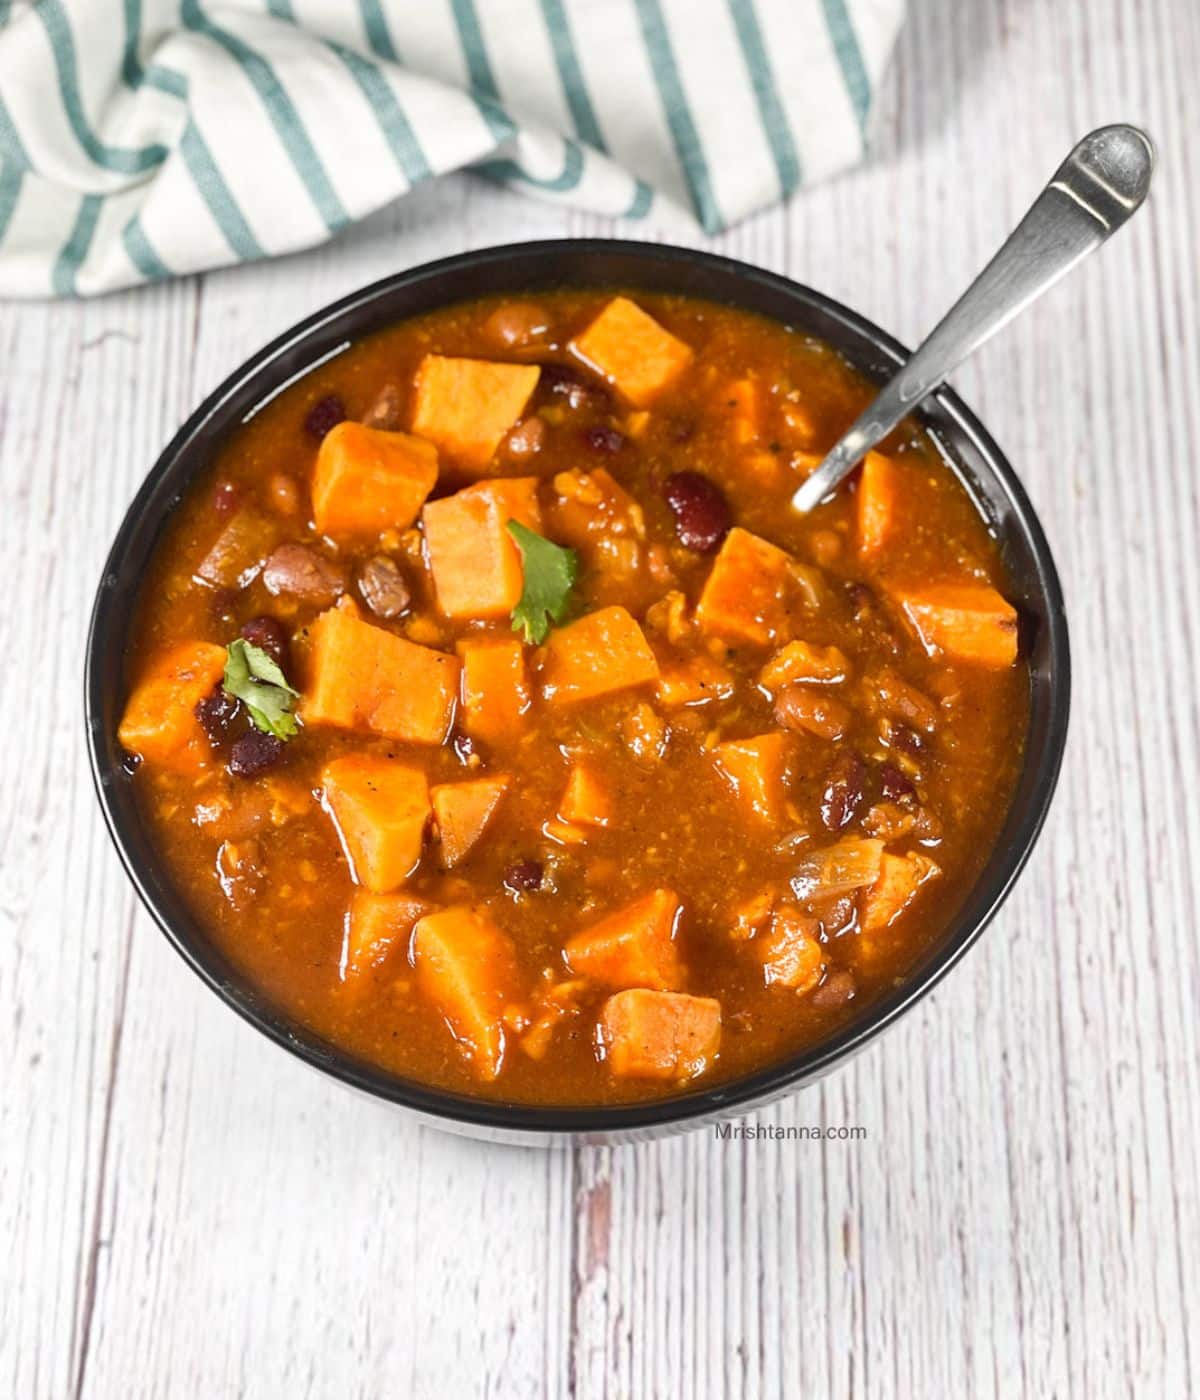 A bowl of sweet potato chili is on the table.